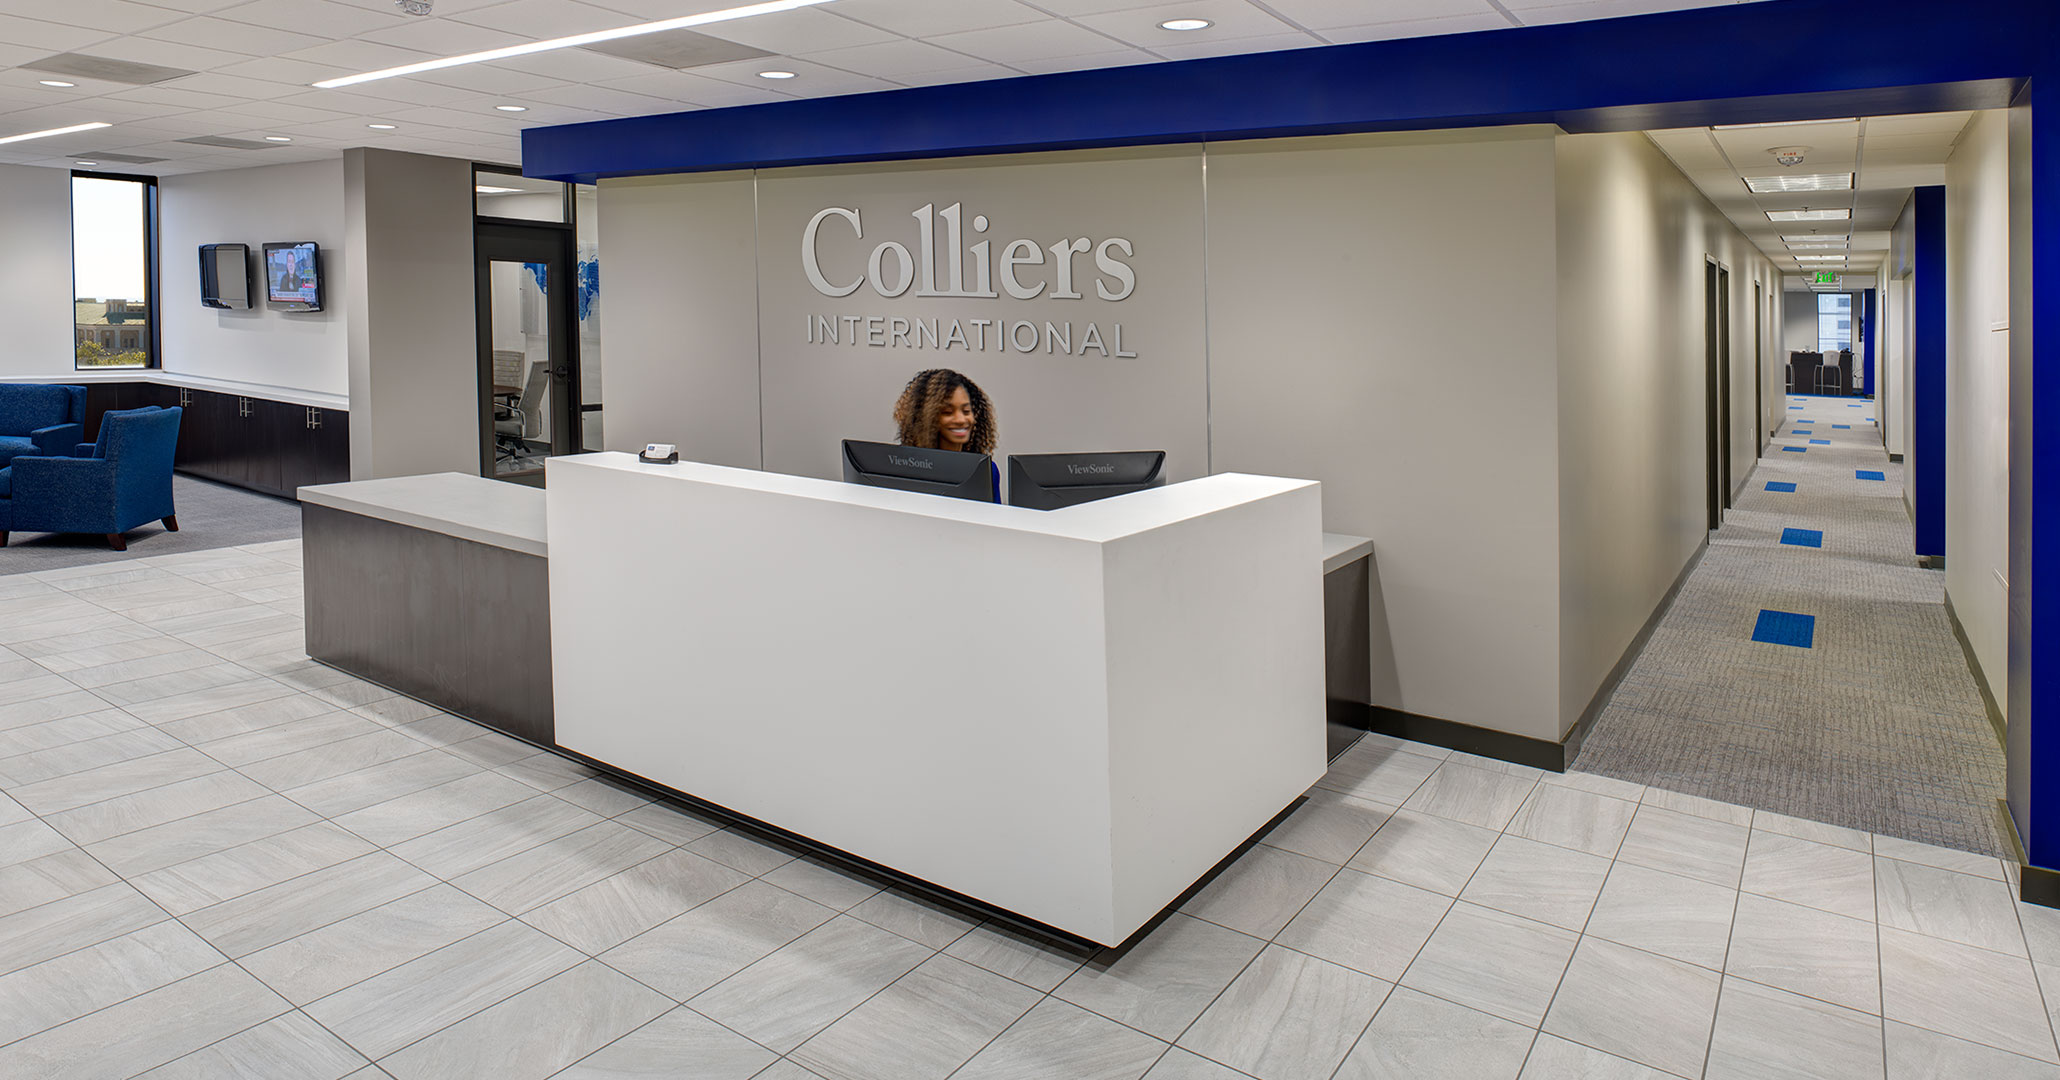 Boudreaux architects worked with Colliers to provide interior design and programming services for their new office space.